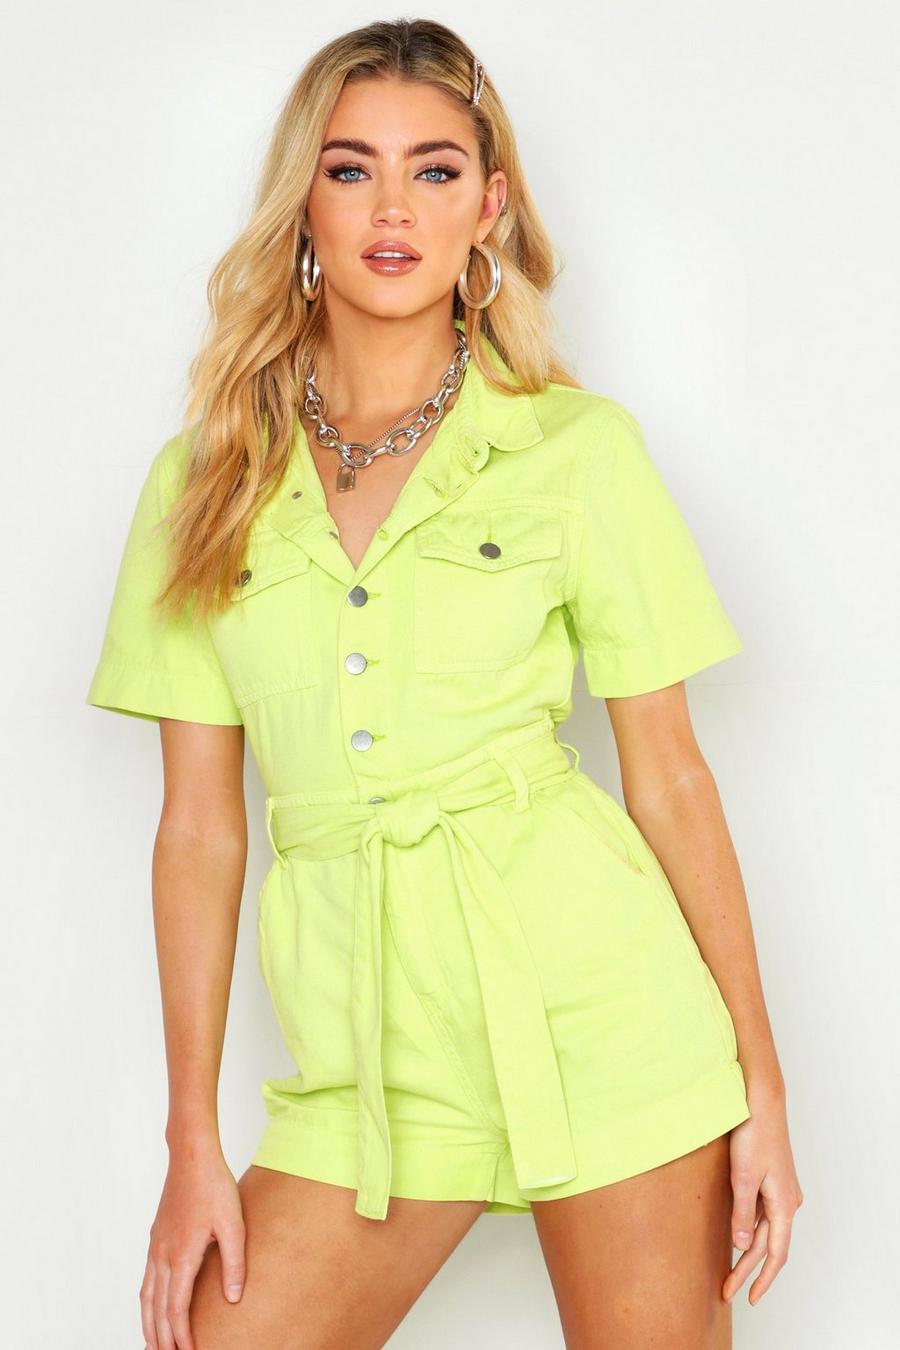 Soft lime All Spring Outfits